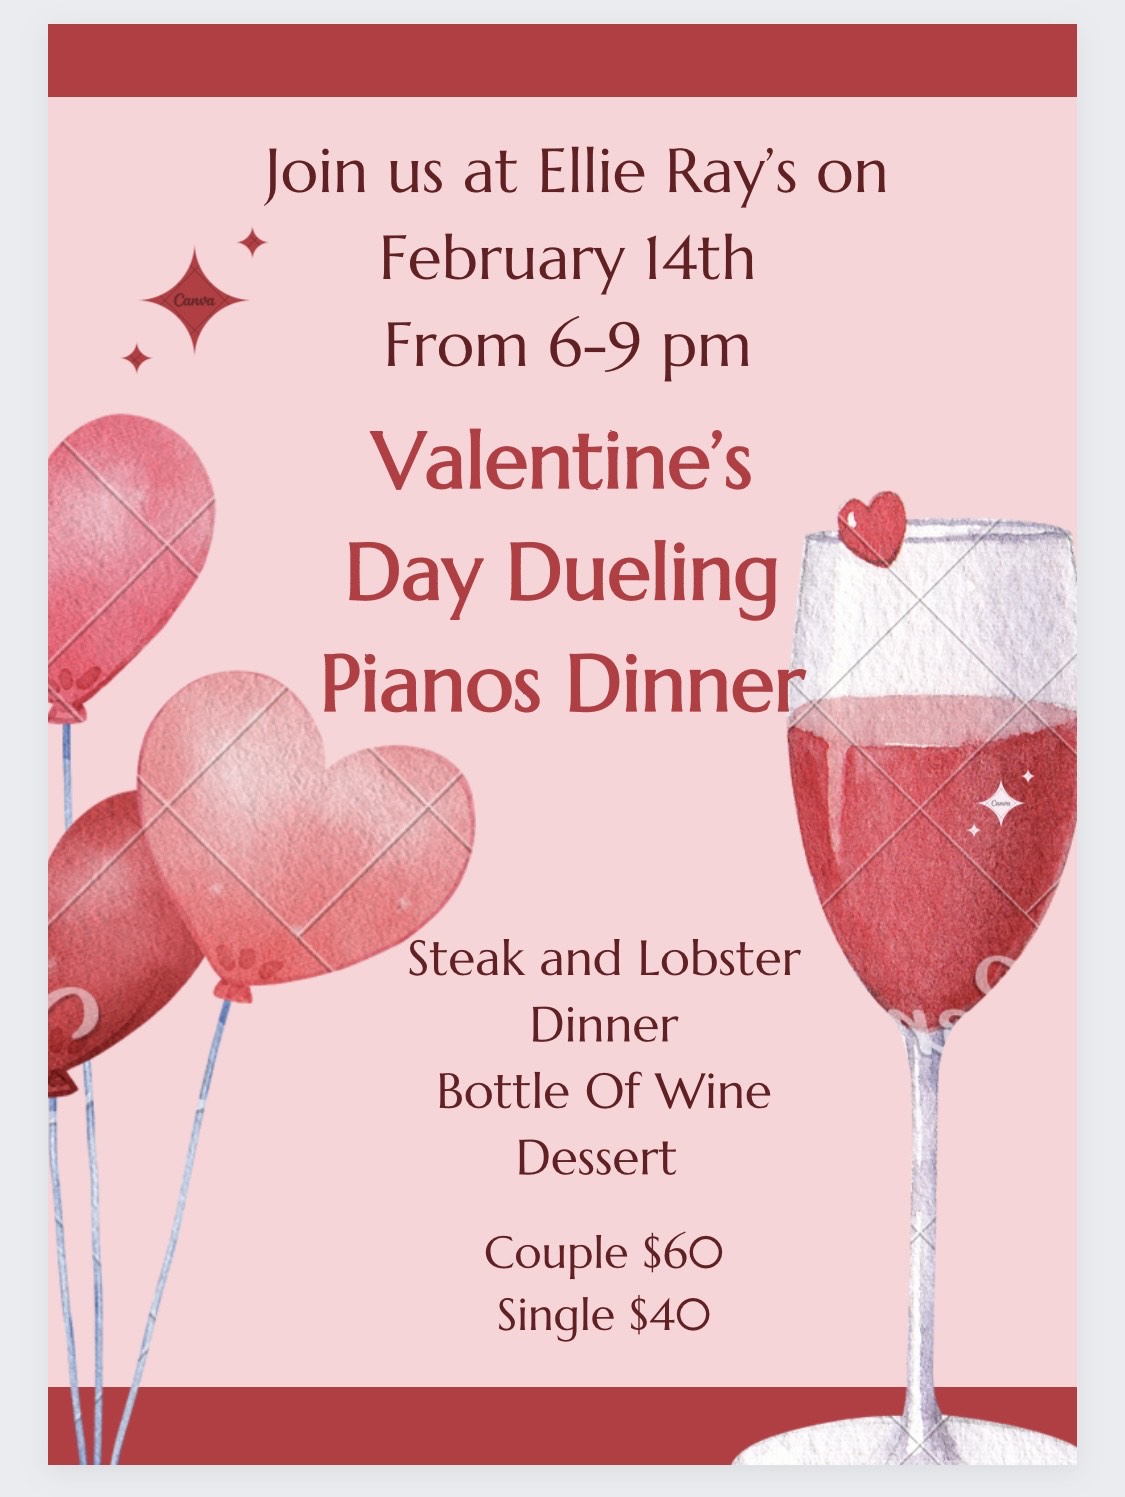 Valentine's Day Dueling Pianos Dinner at Ellie Ray's RV Resort and Campground